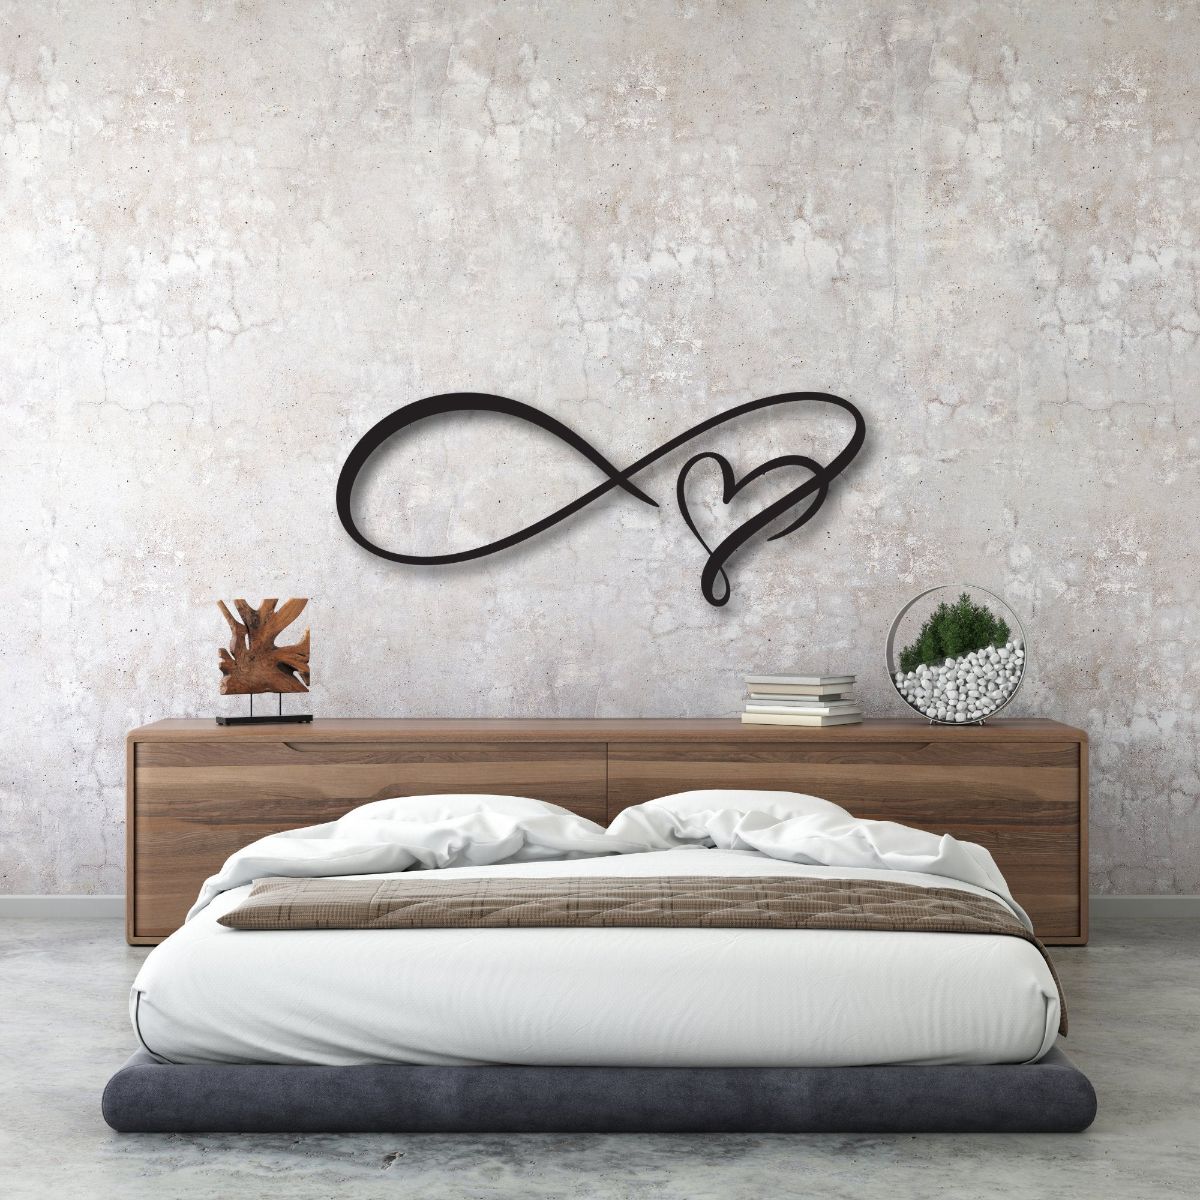 Metal Infinity Heart Sign - Metal Infinity Symbol And Heart Wall Decor - Love Valentine Gift Metalsign - Infinity Love Wedding Sign